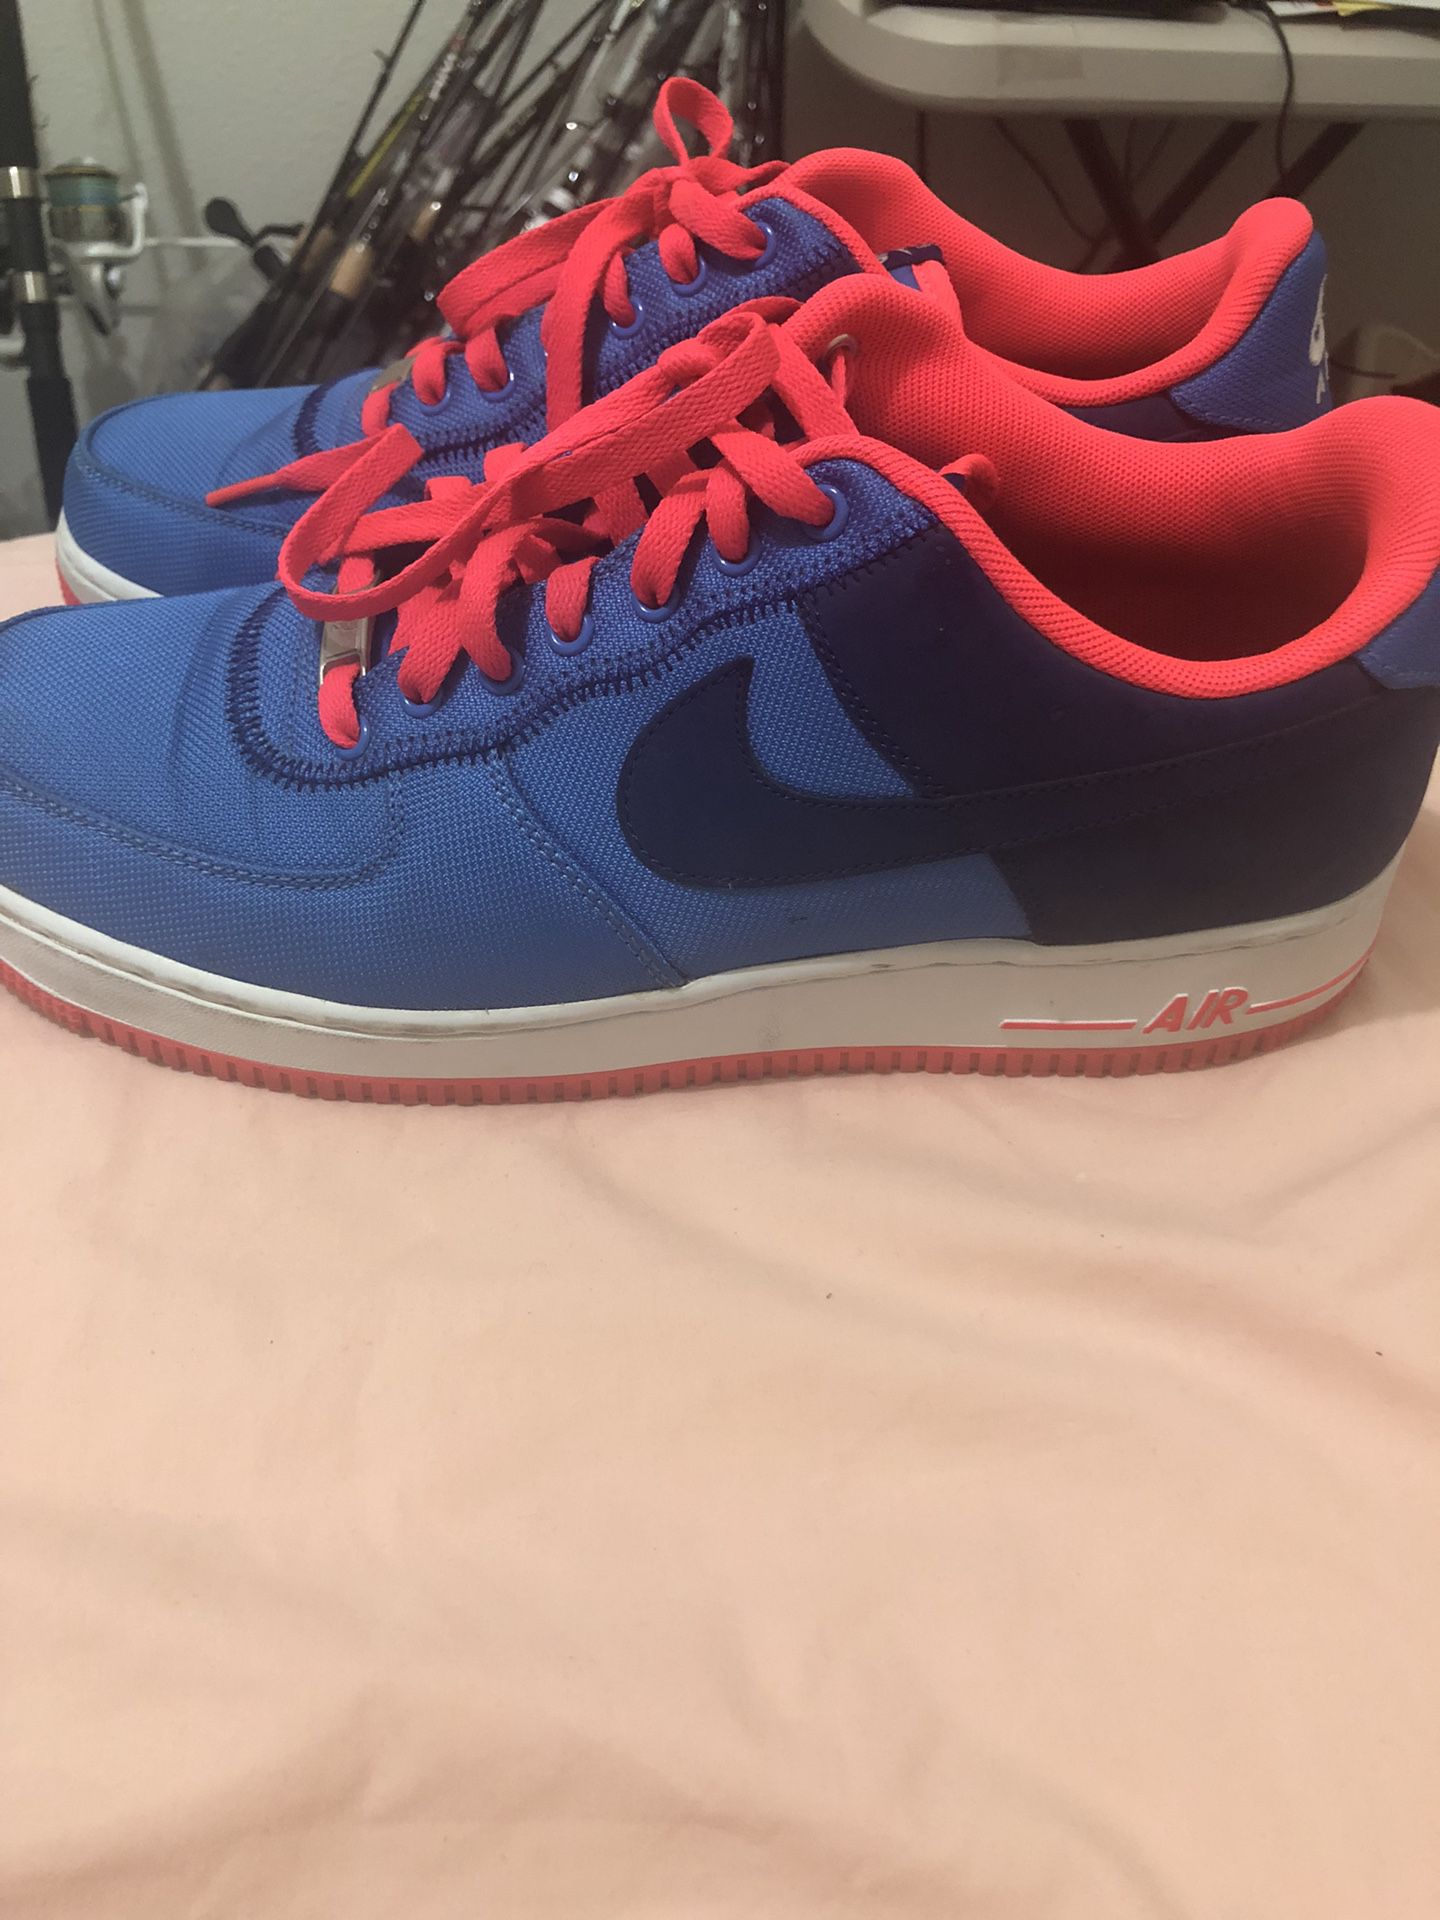  Nike Air Force 1 ‘82 Size 11